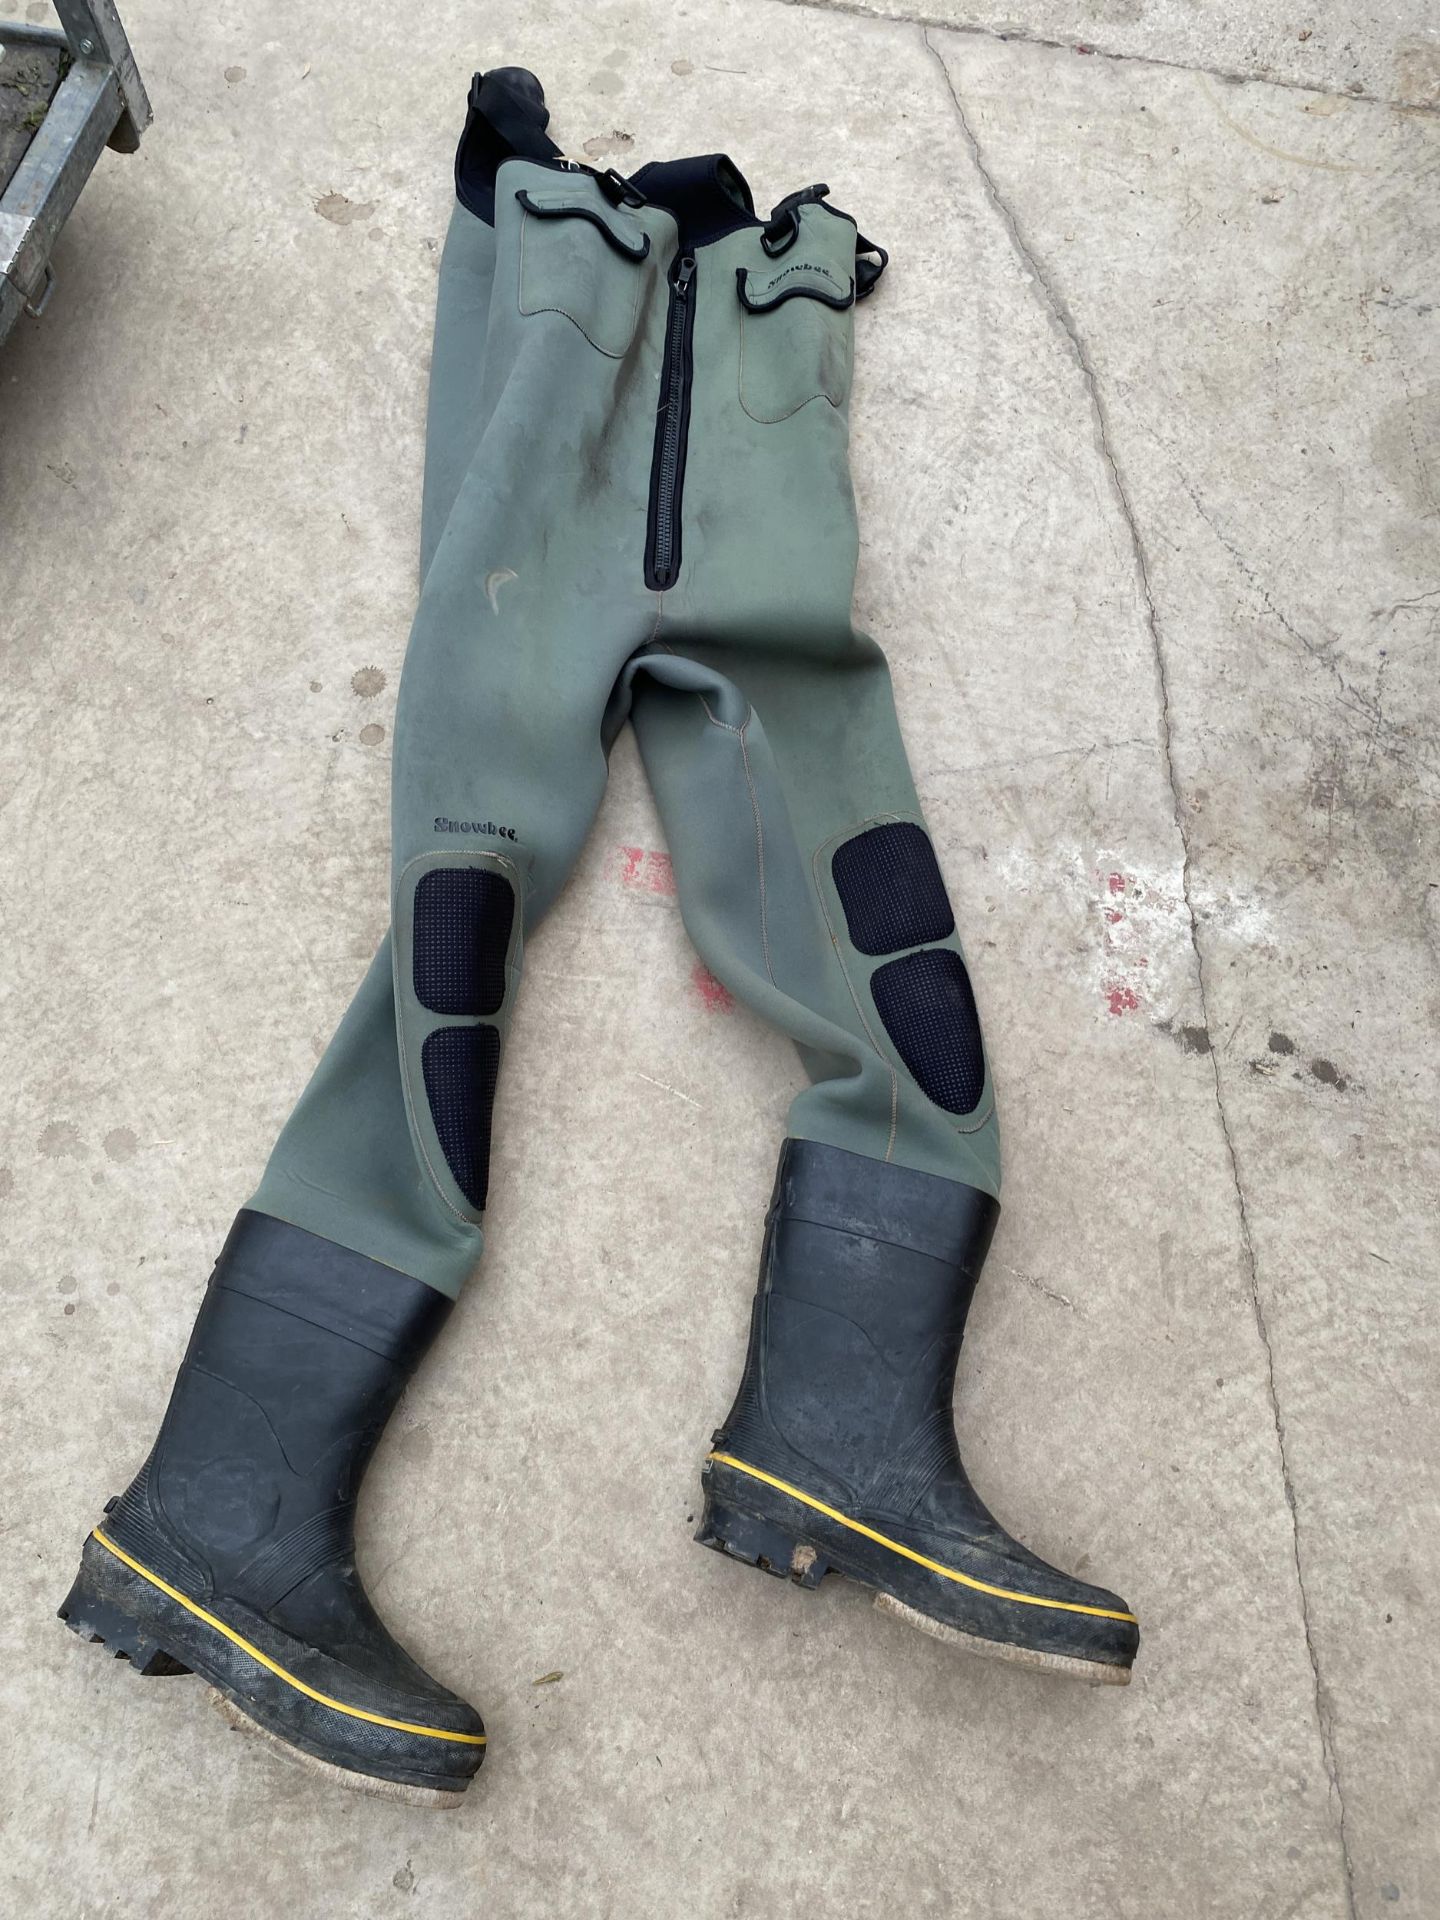 A PAIR OF SIZE 11 SNOWBEE CHEST WADERS